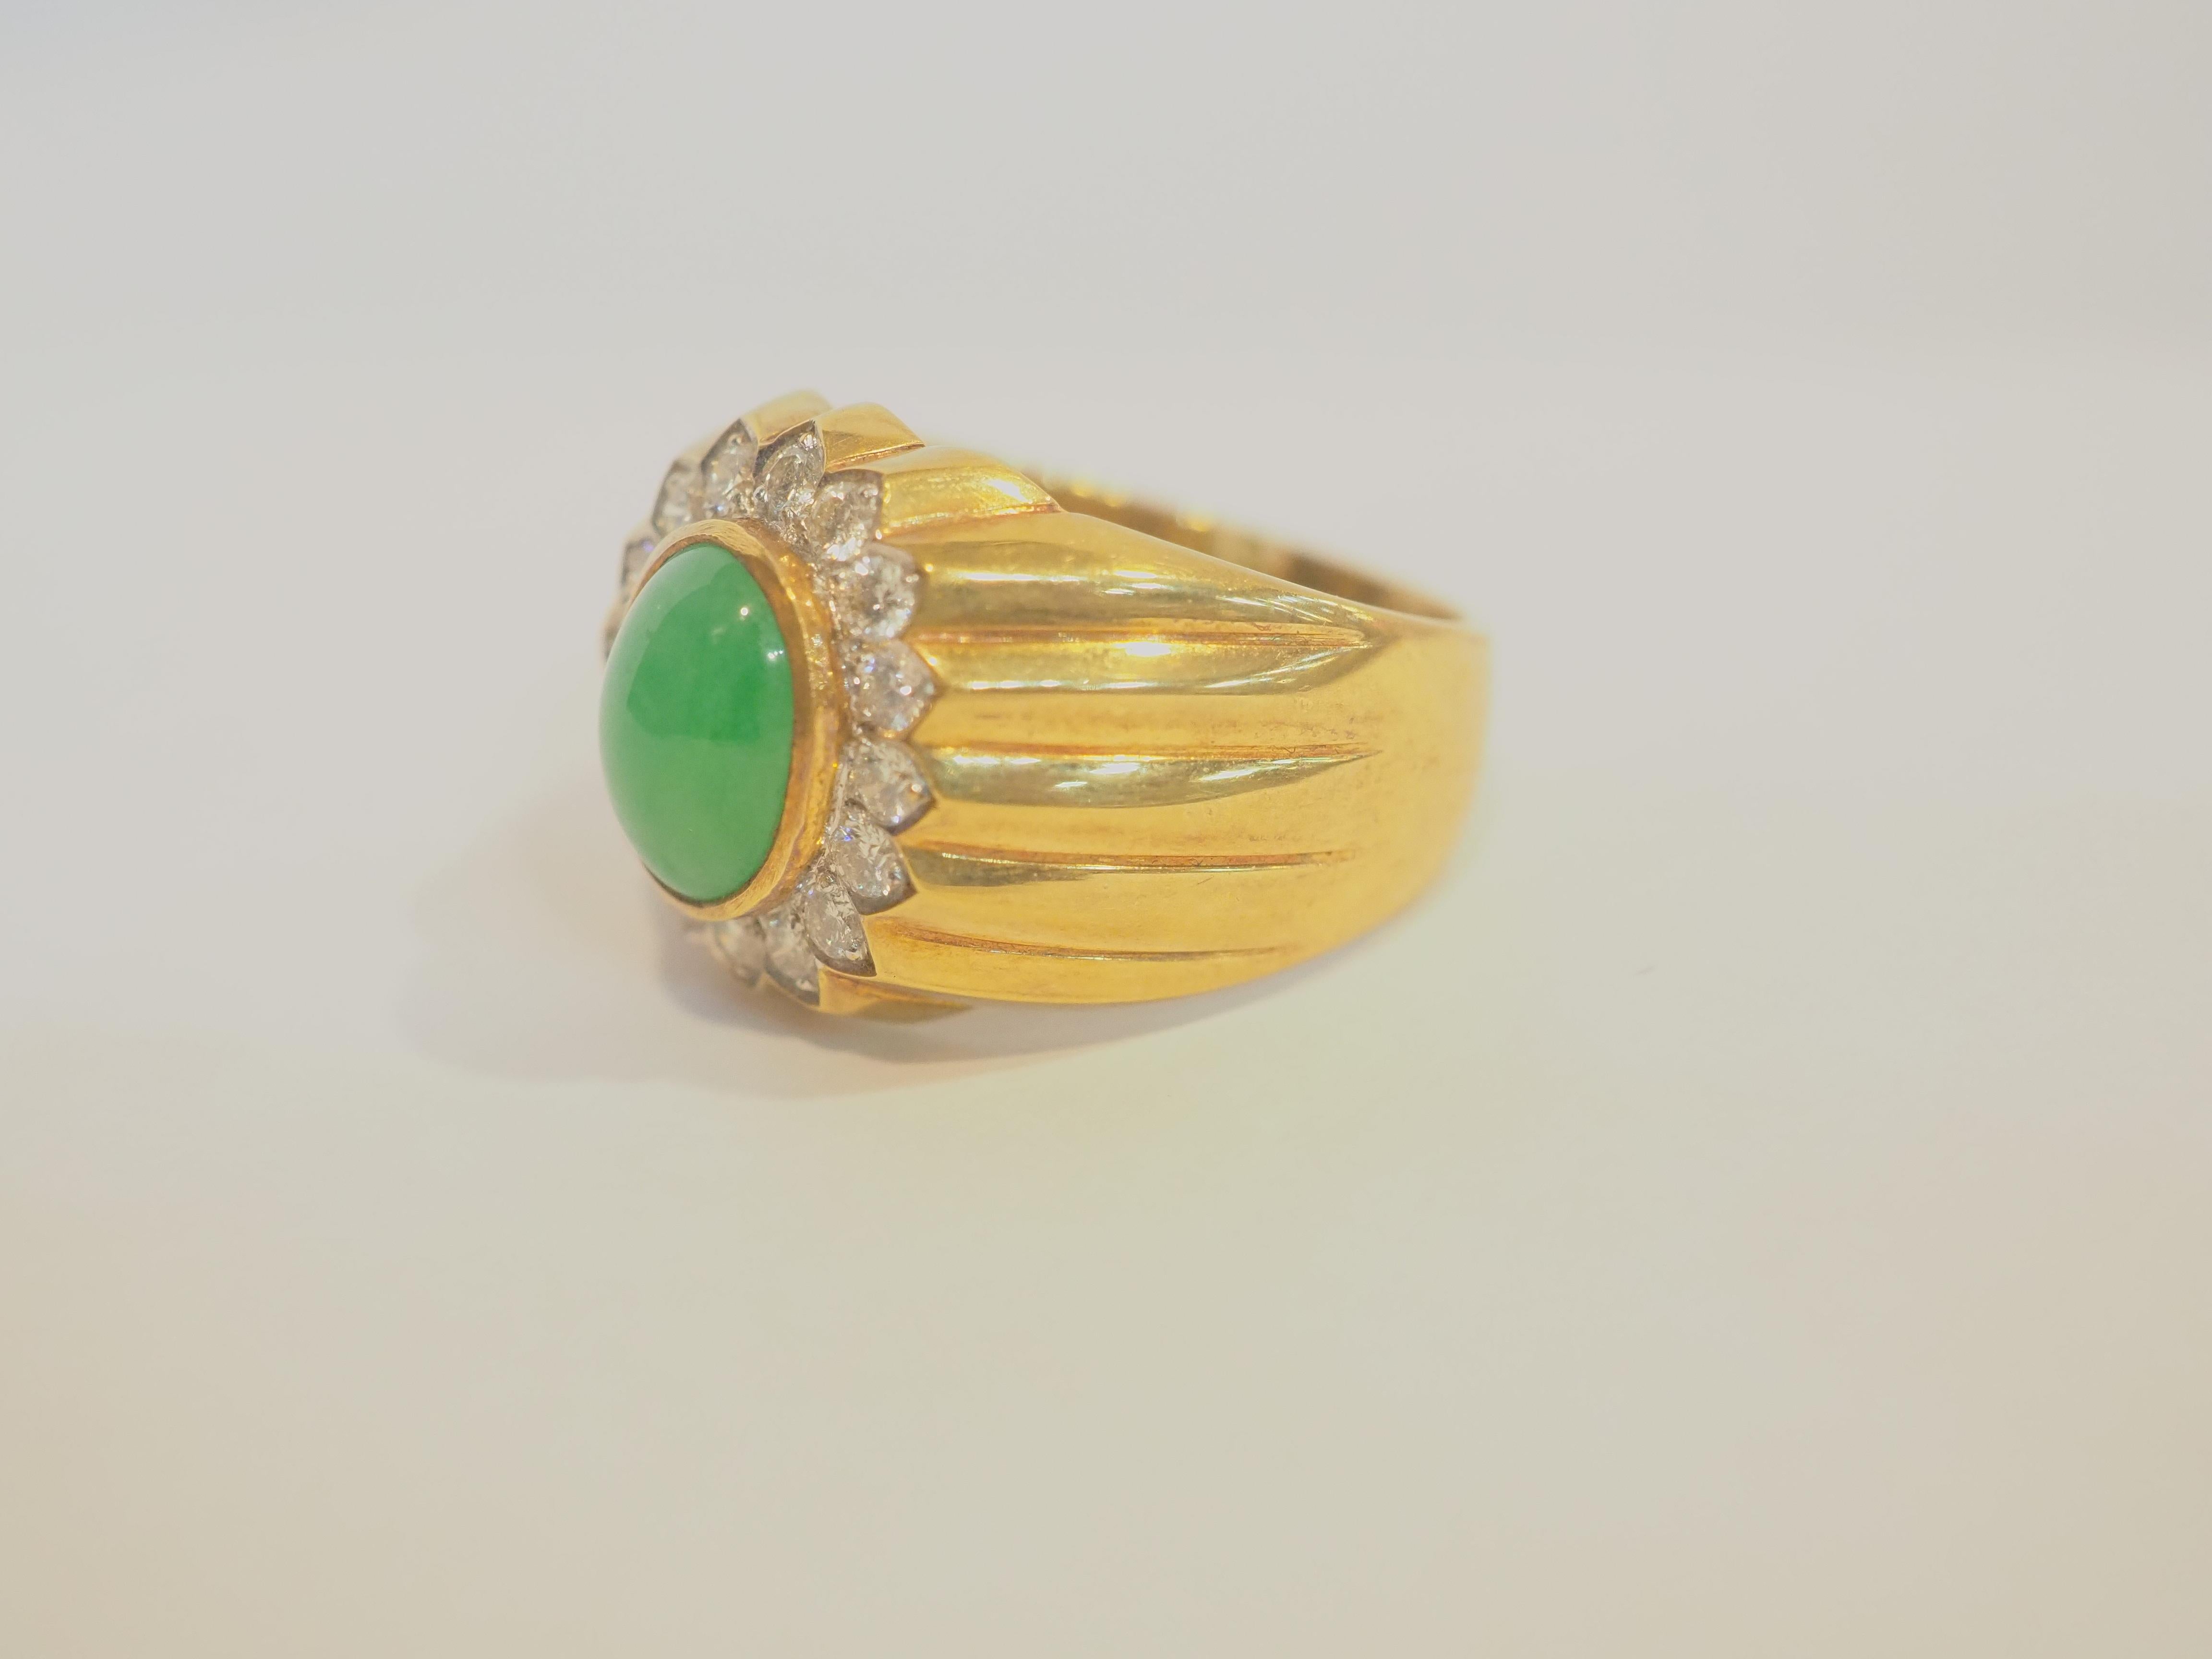  This fantastic cocktail piece is a beautiful 18K yellow gold fine Trombino dome ring for man. It features a fine cabochon Burma jadeite   as the main gemstone. The color is very saturated with nice glow, and the surface is very clear and is very